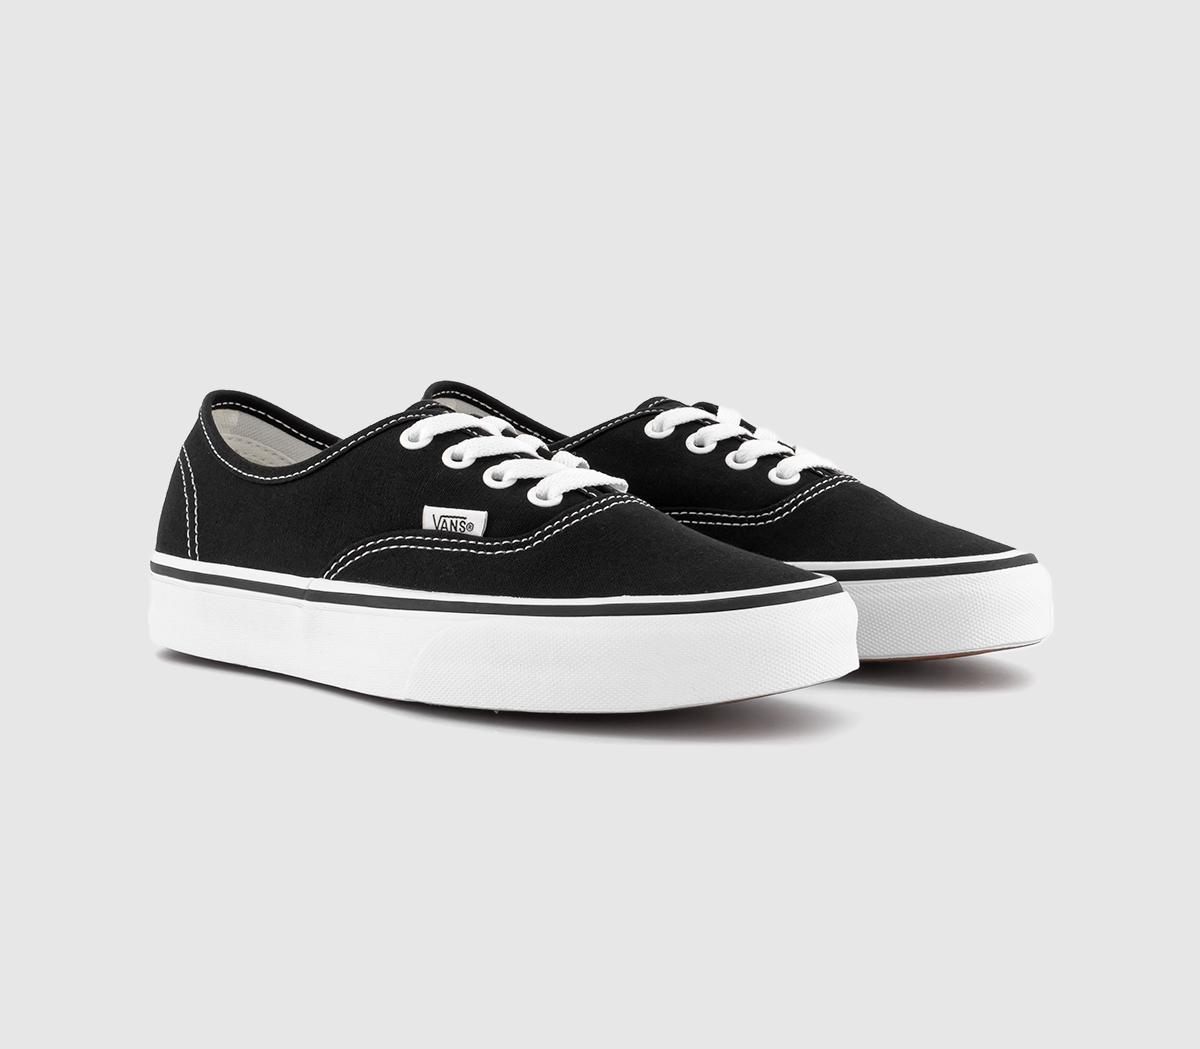 Vans Mens Authentic Trainers In Black And White, 11